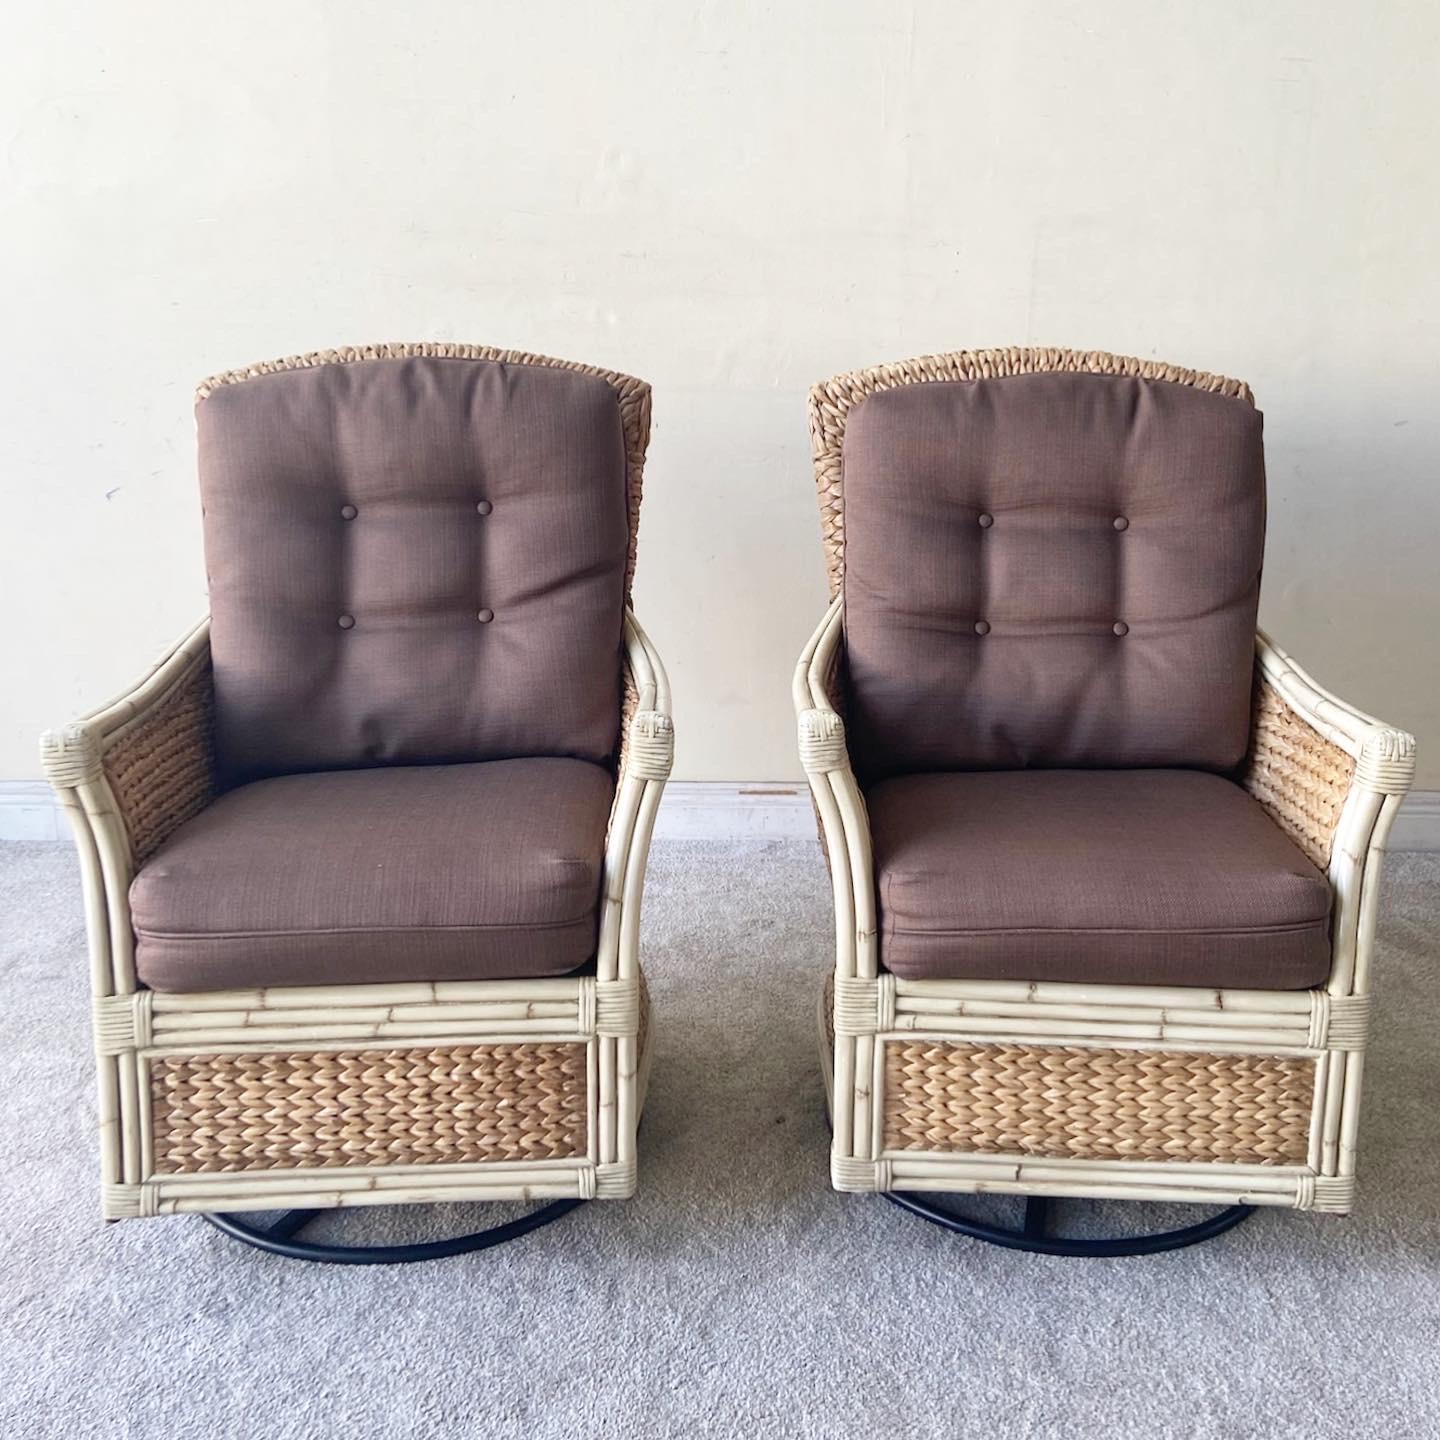 Amazing vintage handmade bohemian rocking swivel chairs. Each feature a painted cream bamboo and rattan frame with woven sea grass through out the chairs.